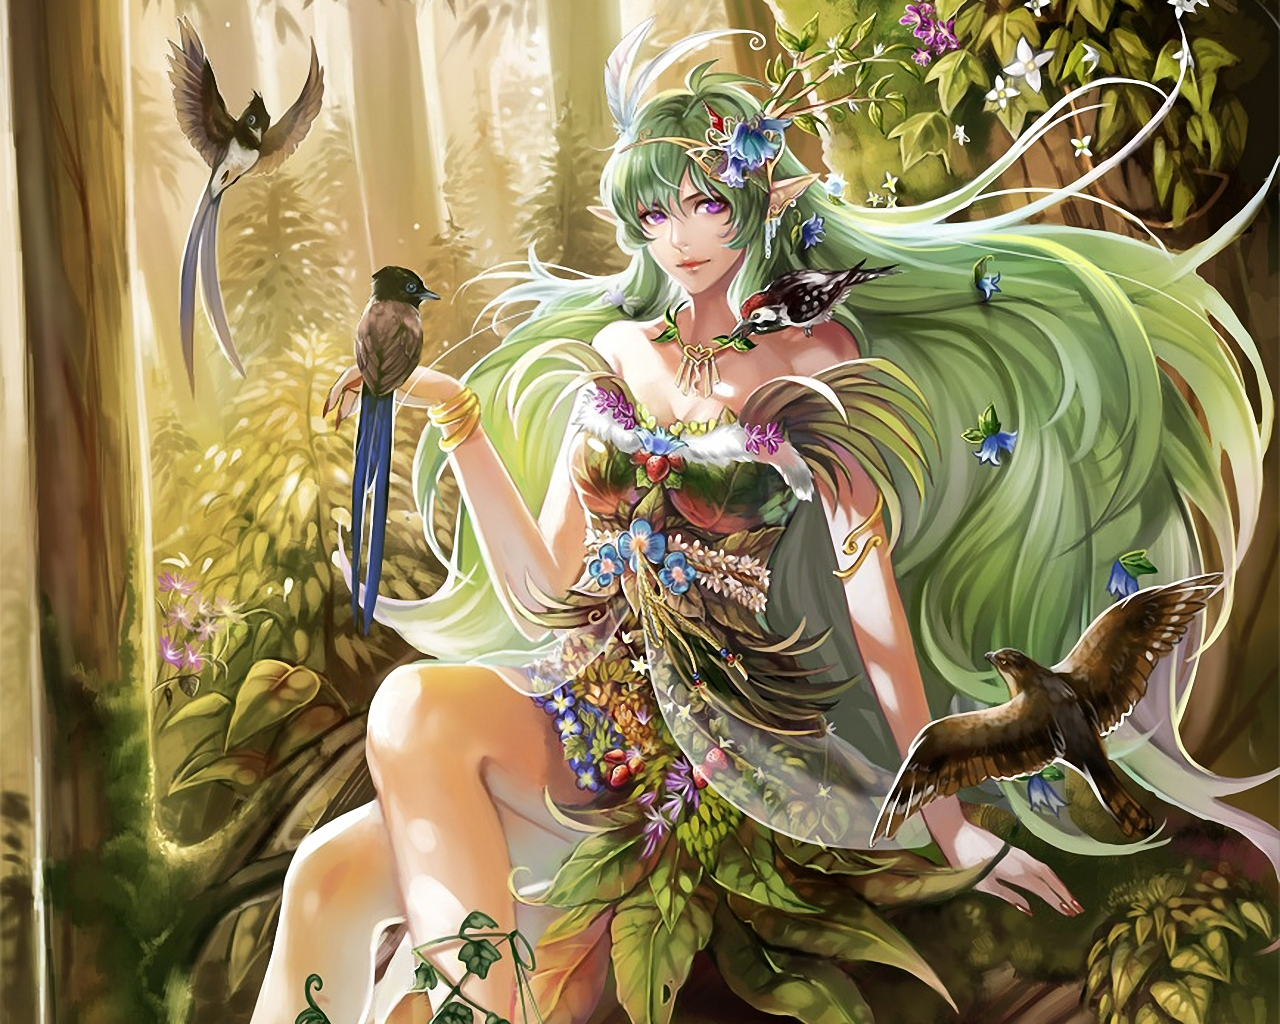 Forest Nymph Download HD Wallpaper and Free Image